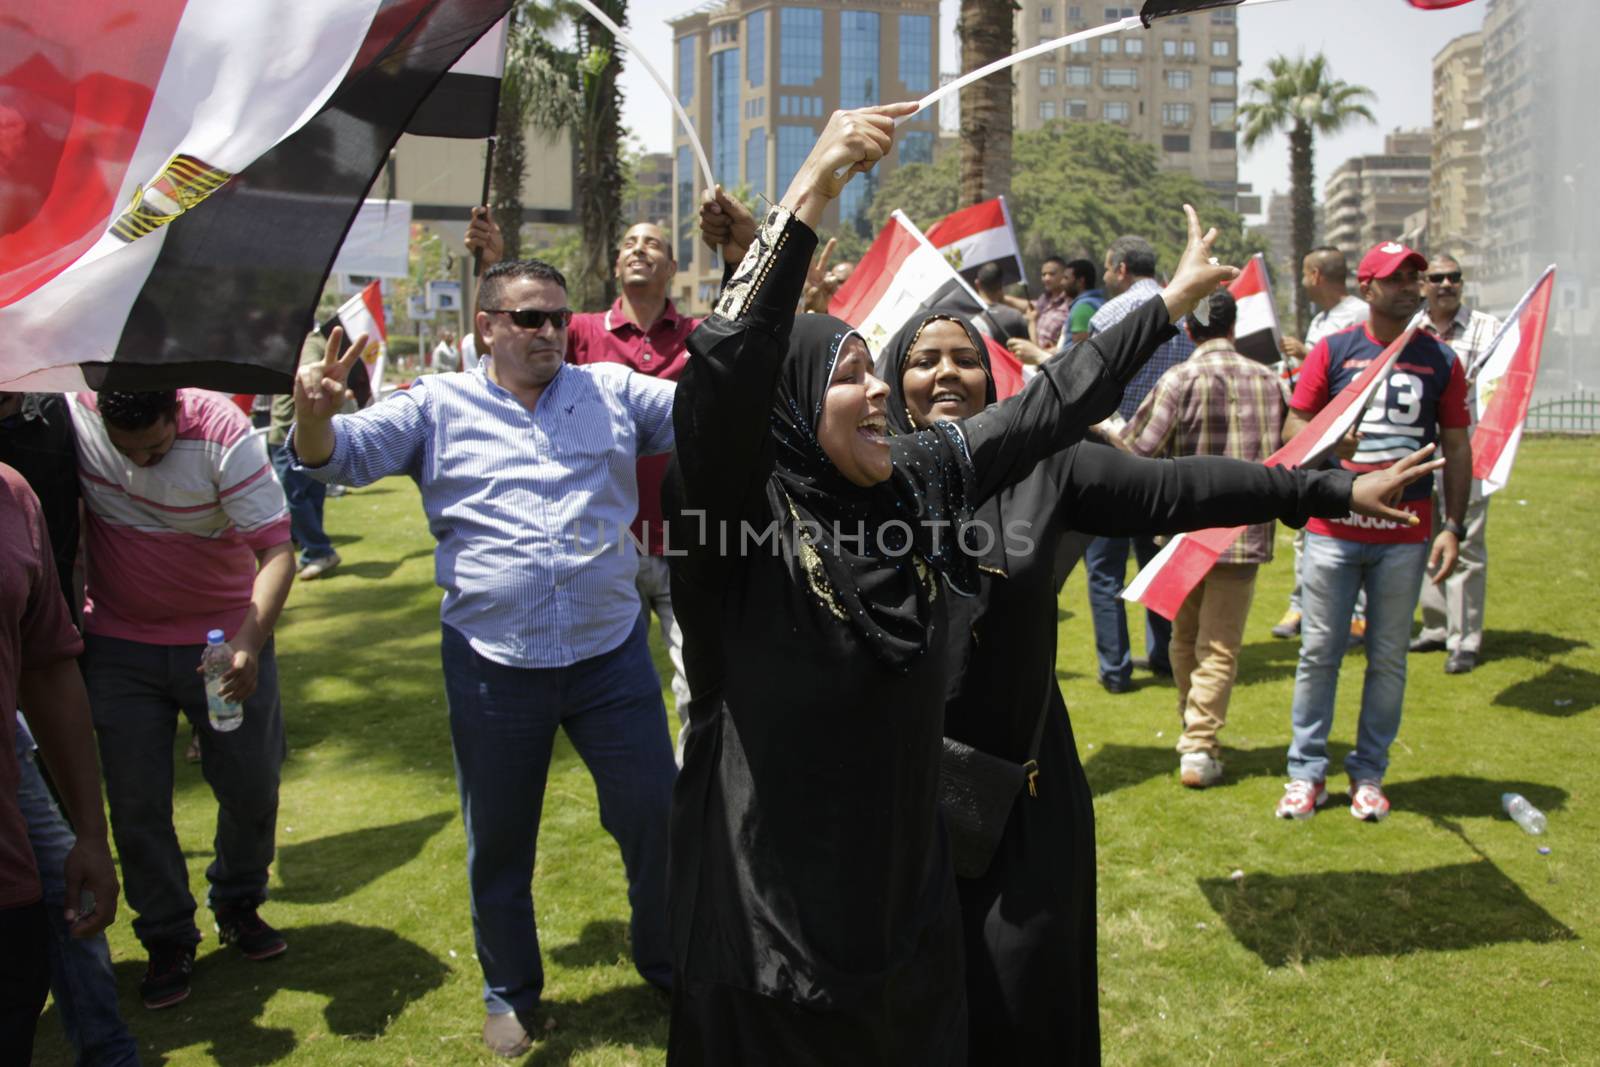 EGYPT, Giza: People wave national flags as they gather in Mostafa Mahmoud Square in Giza, near Cairo on April 25, 2016 to commemorate the thirty-fourth anniversary of Sinai liberation. This same day, thousands of security personnel were deployed around Cairo ahead of mass planned protests over the return of two Red Sea islands to Saudi Arabia, a decision that has provoked some of the most open criticism of President Abdel-Fattah el-Sissi's leadership.